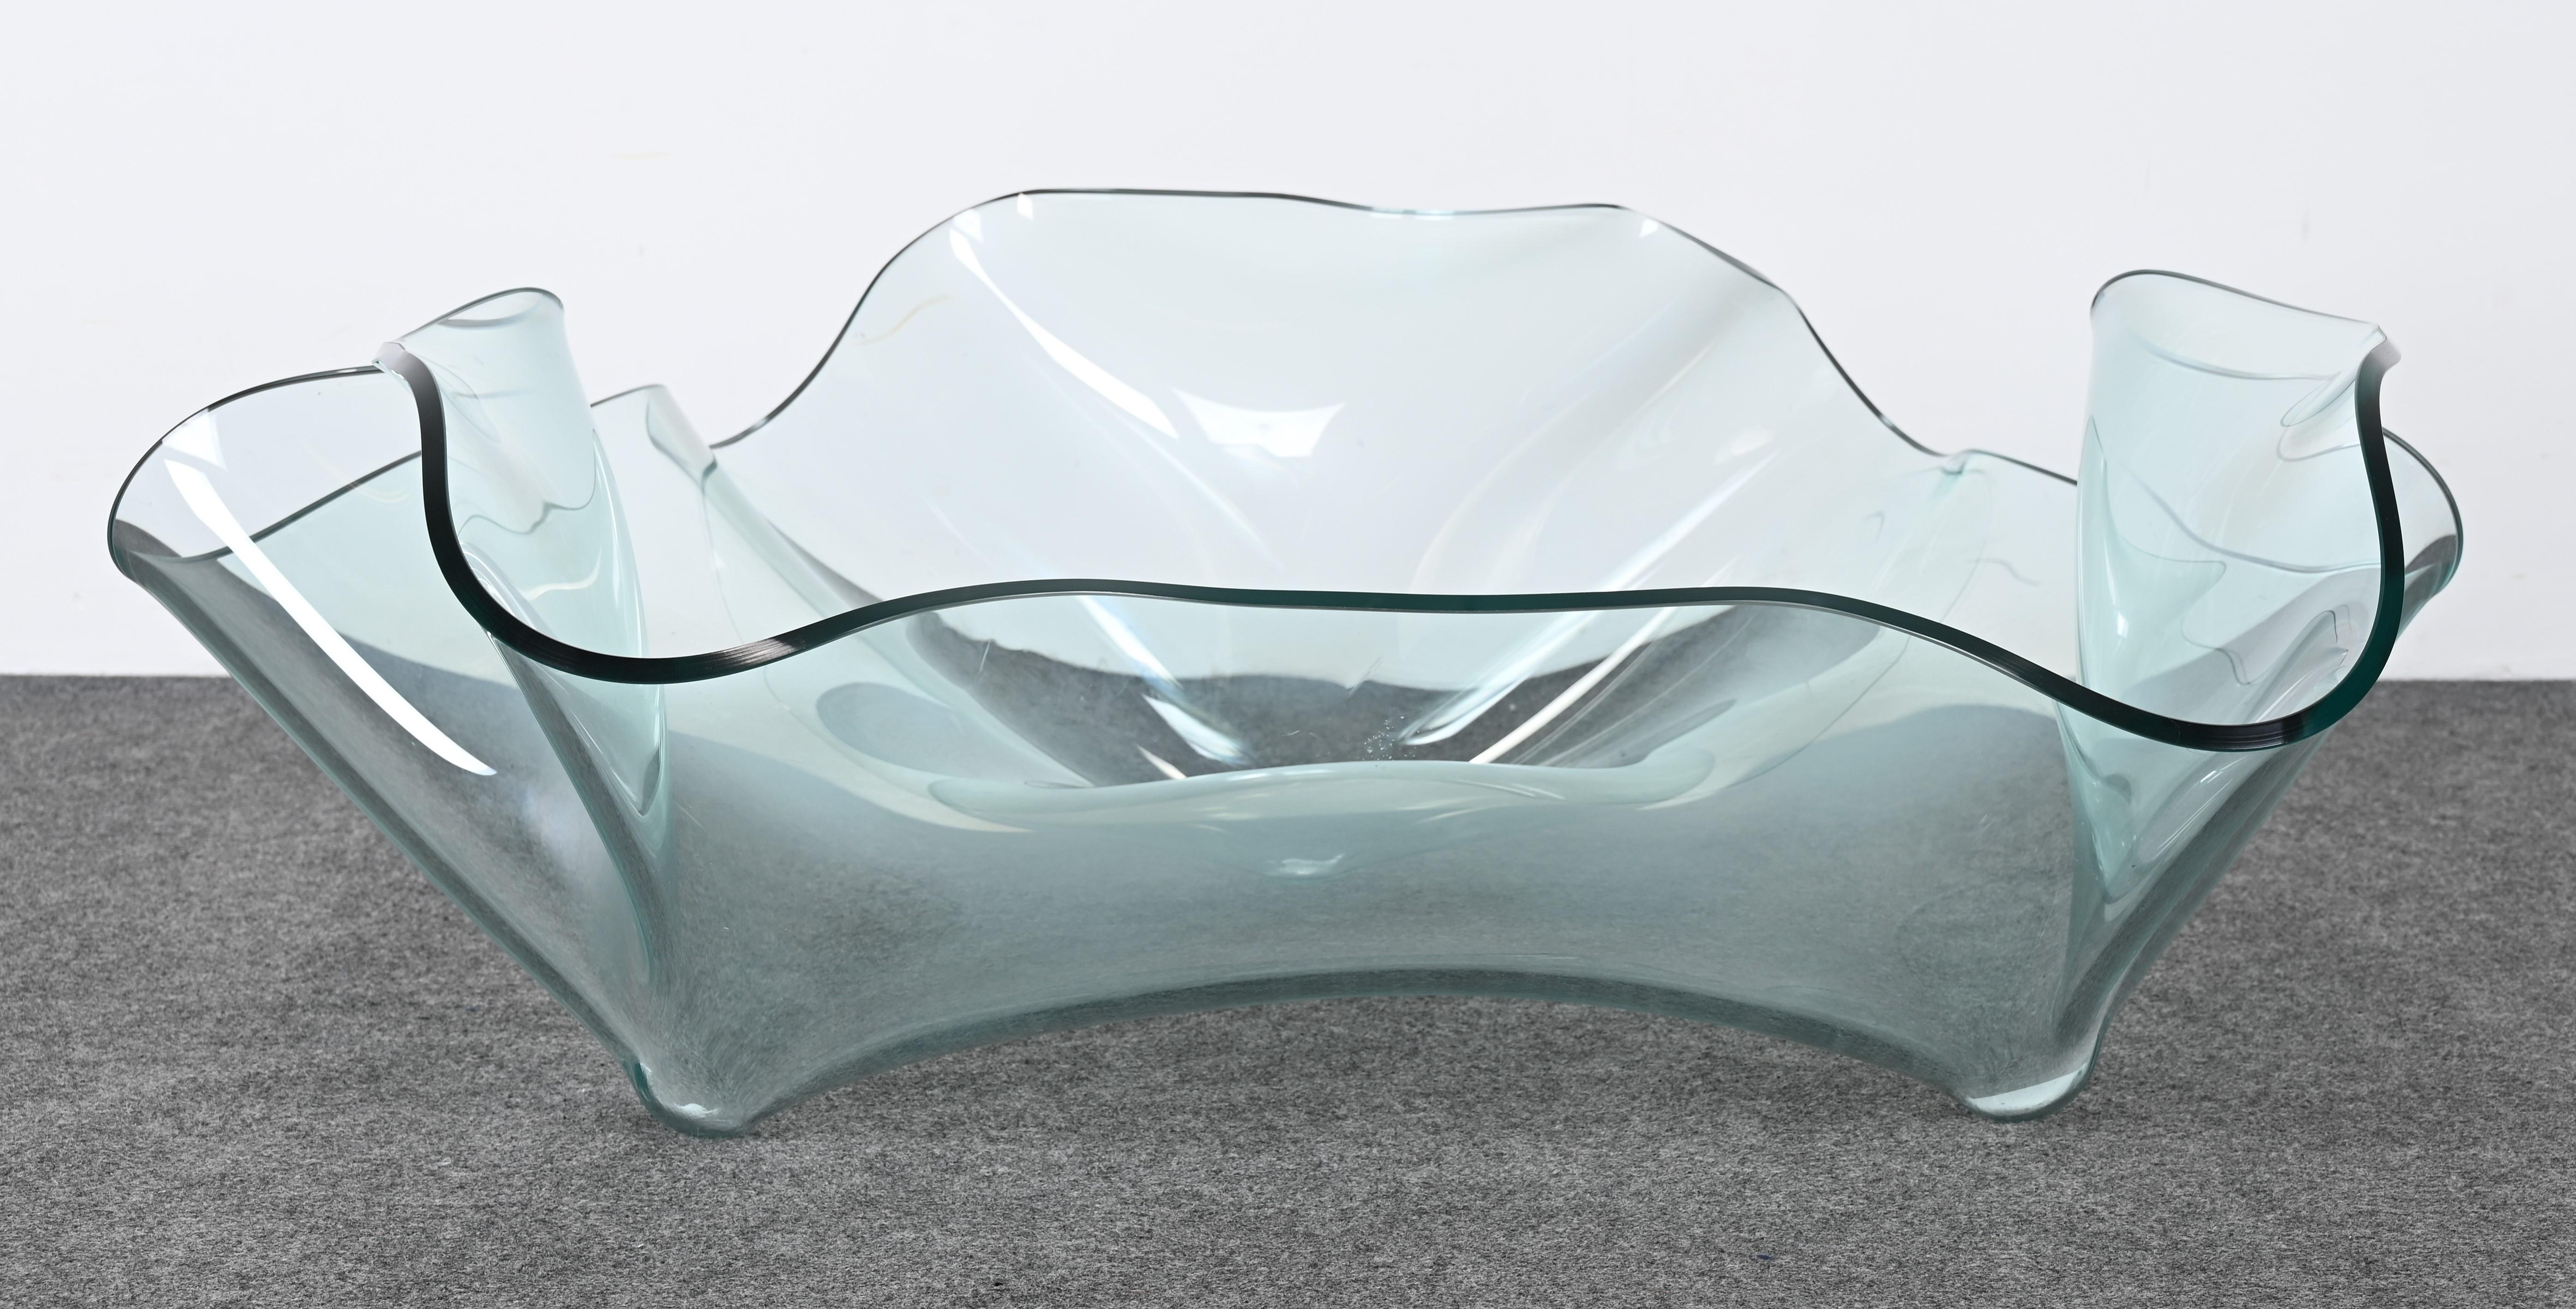 A Laurel Fyfe Sculptural Handkerchief Art Glass Coffee Table. This cocktail table is signed and dated 